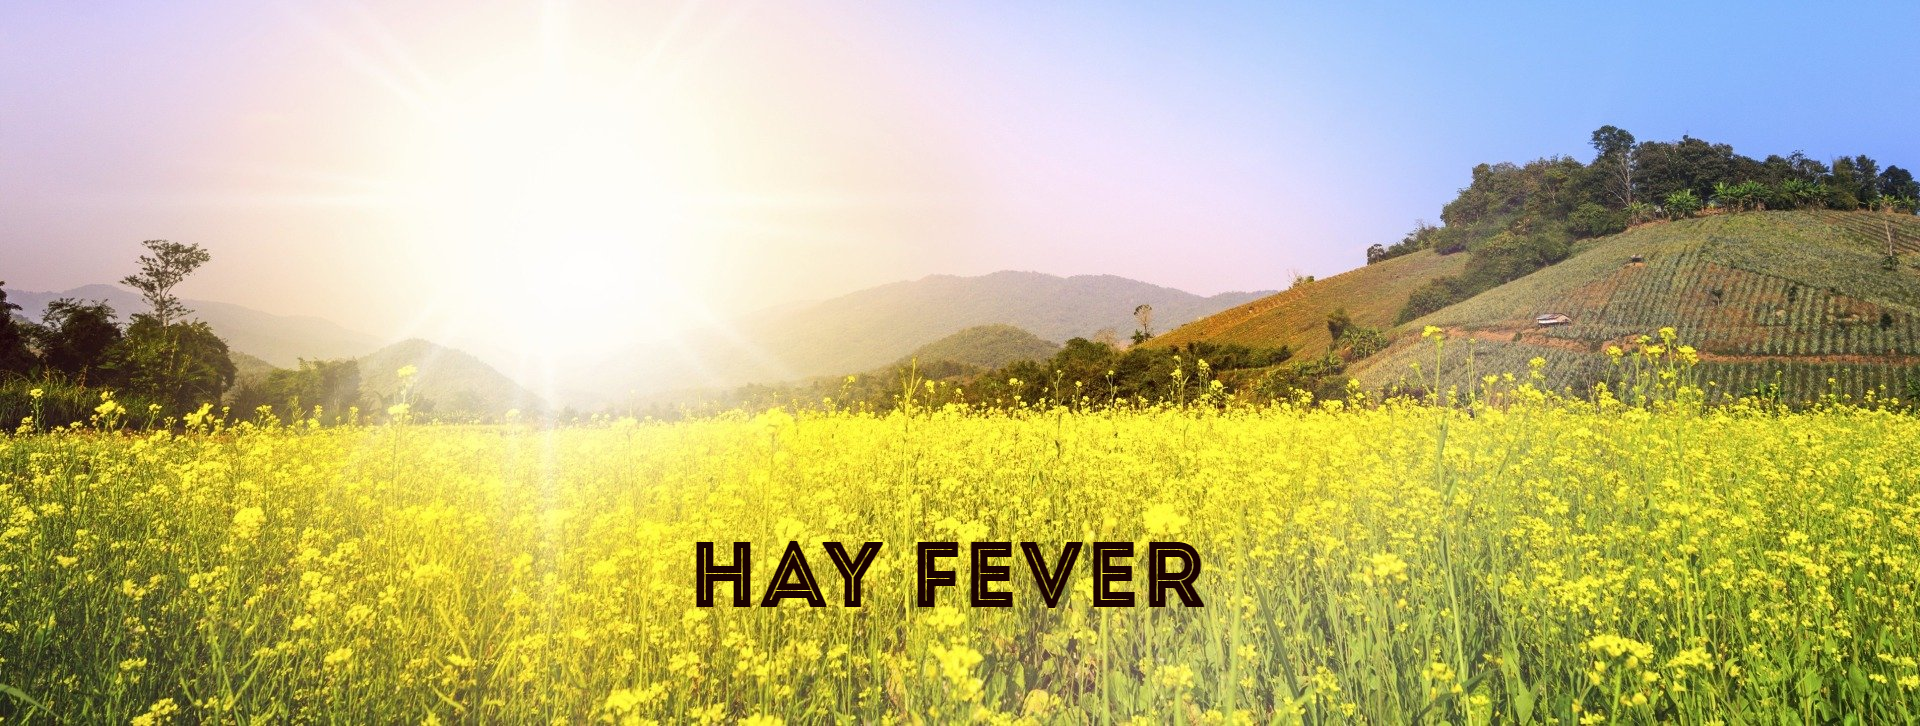 Hay fever, image